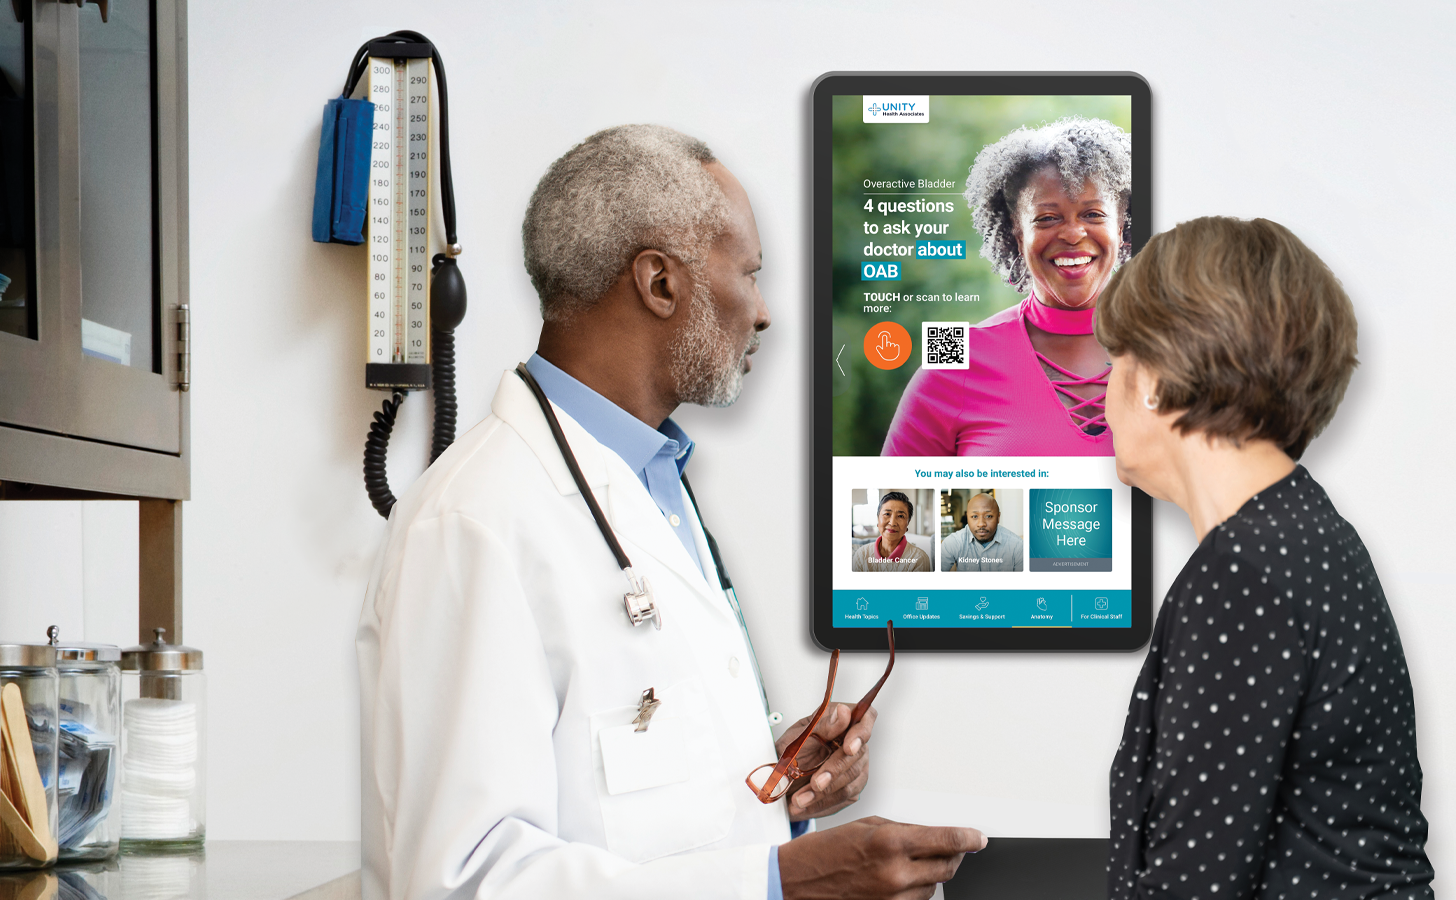 A mature male physician reviews content about overactive bladder on a wall-mounted touchscreen in an exam room with a middle-aged female patient. 